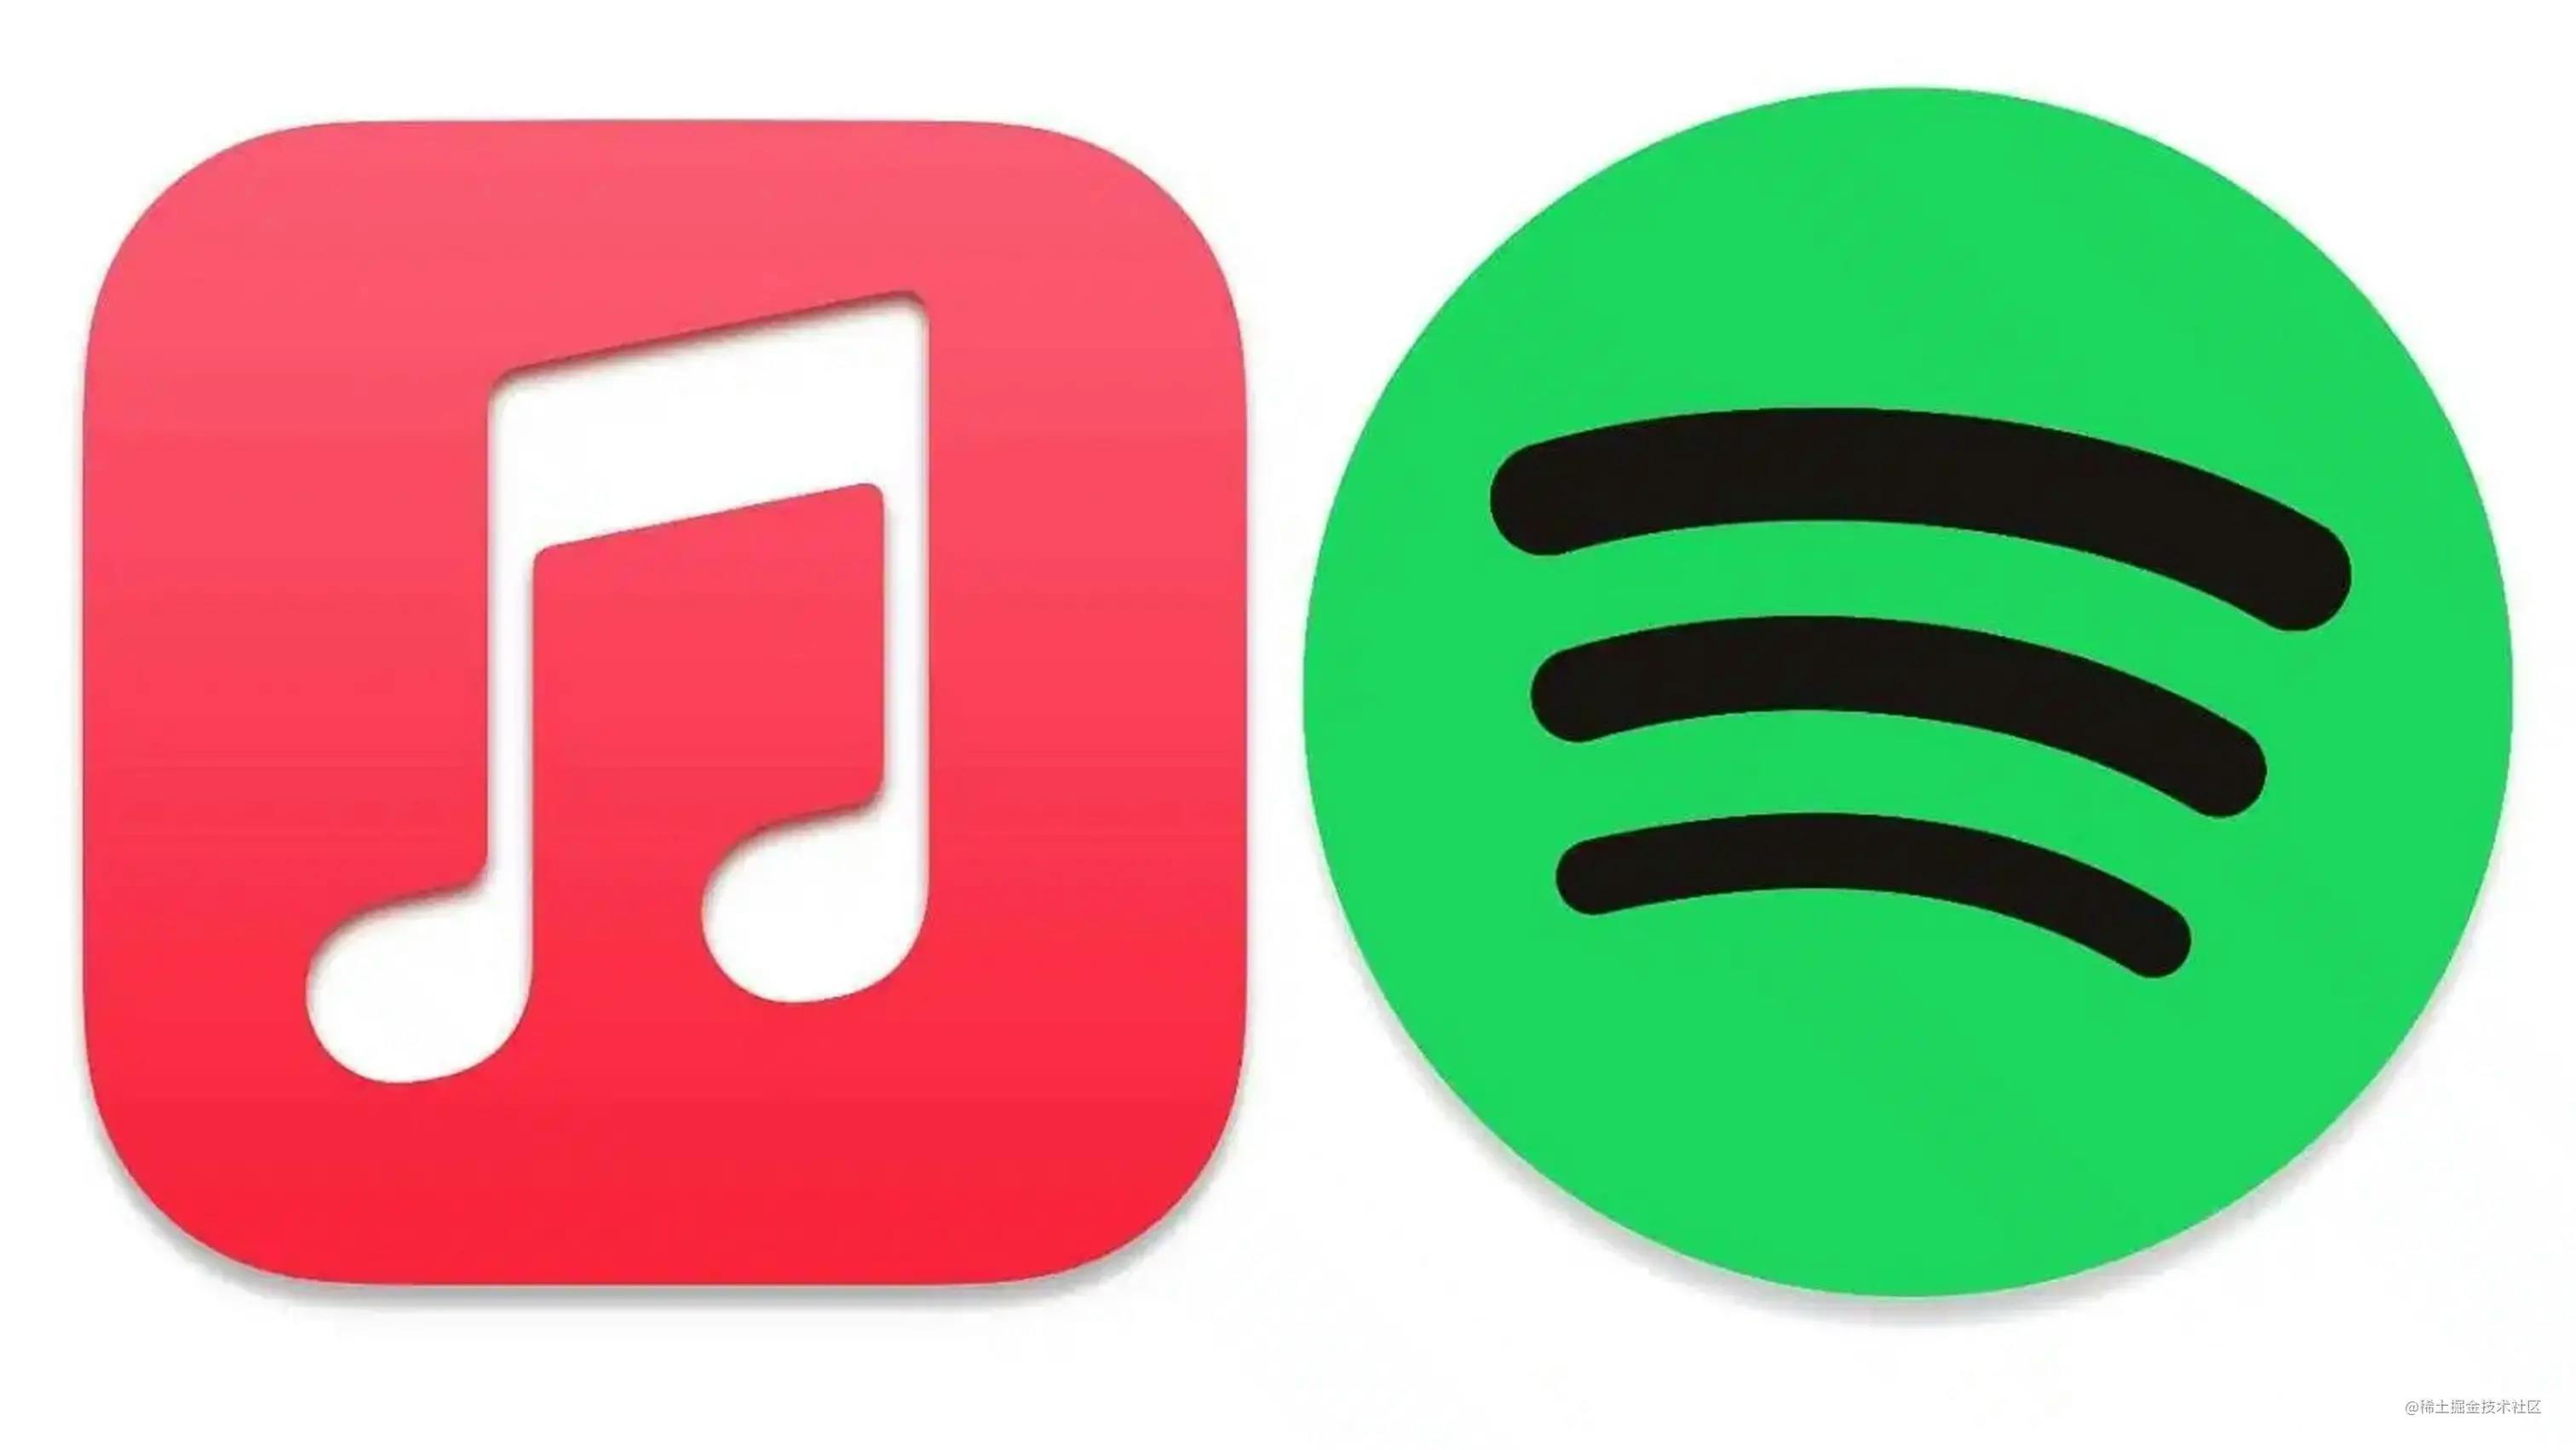 UX analysis: Apple Music vs. Spotify’s artist page